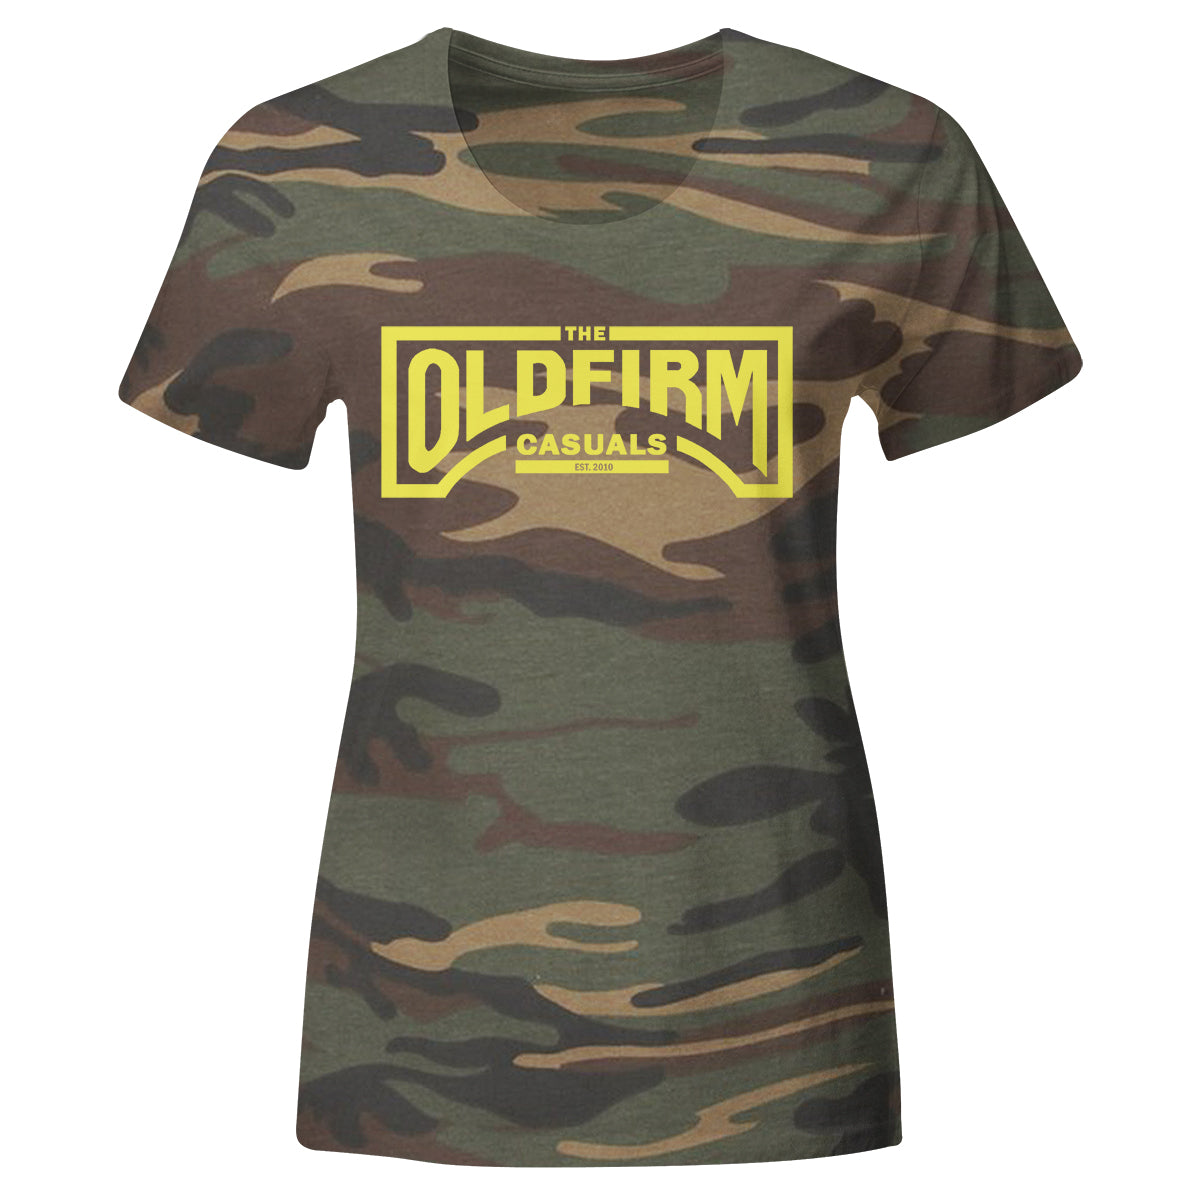 The Old Firm Casuals - Logo - Camo - T-Shirt - Fitted